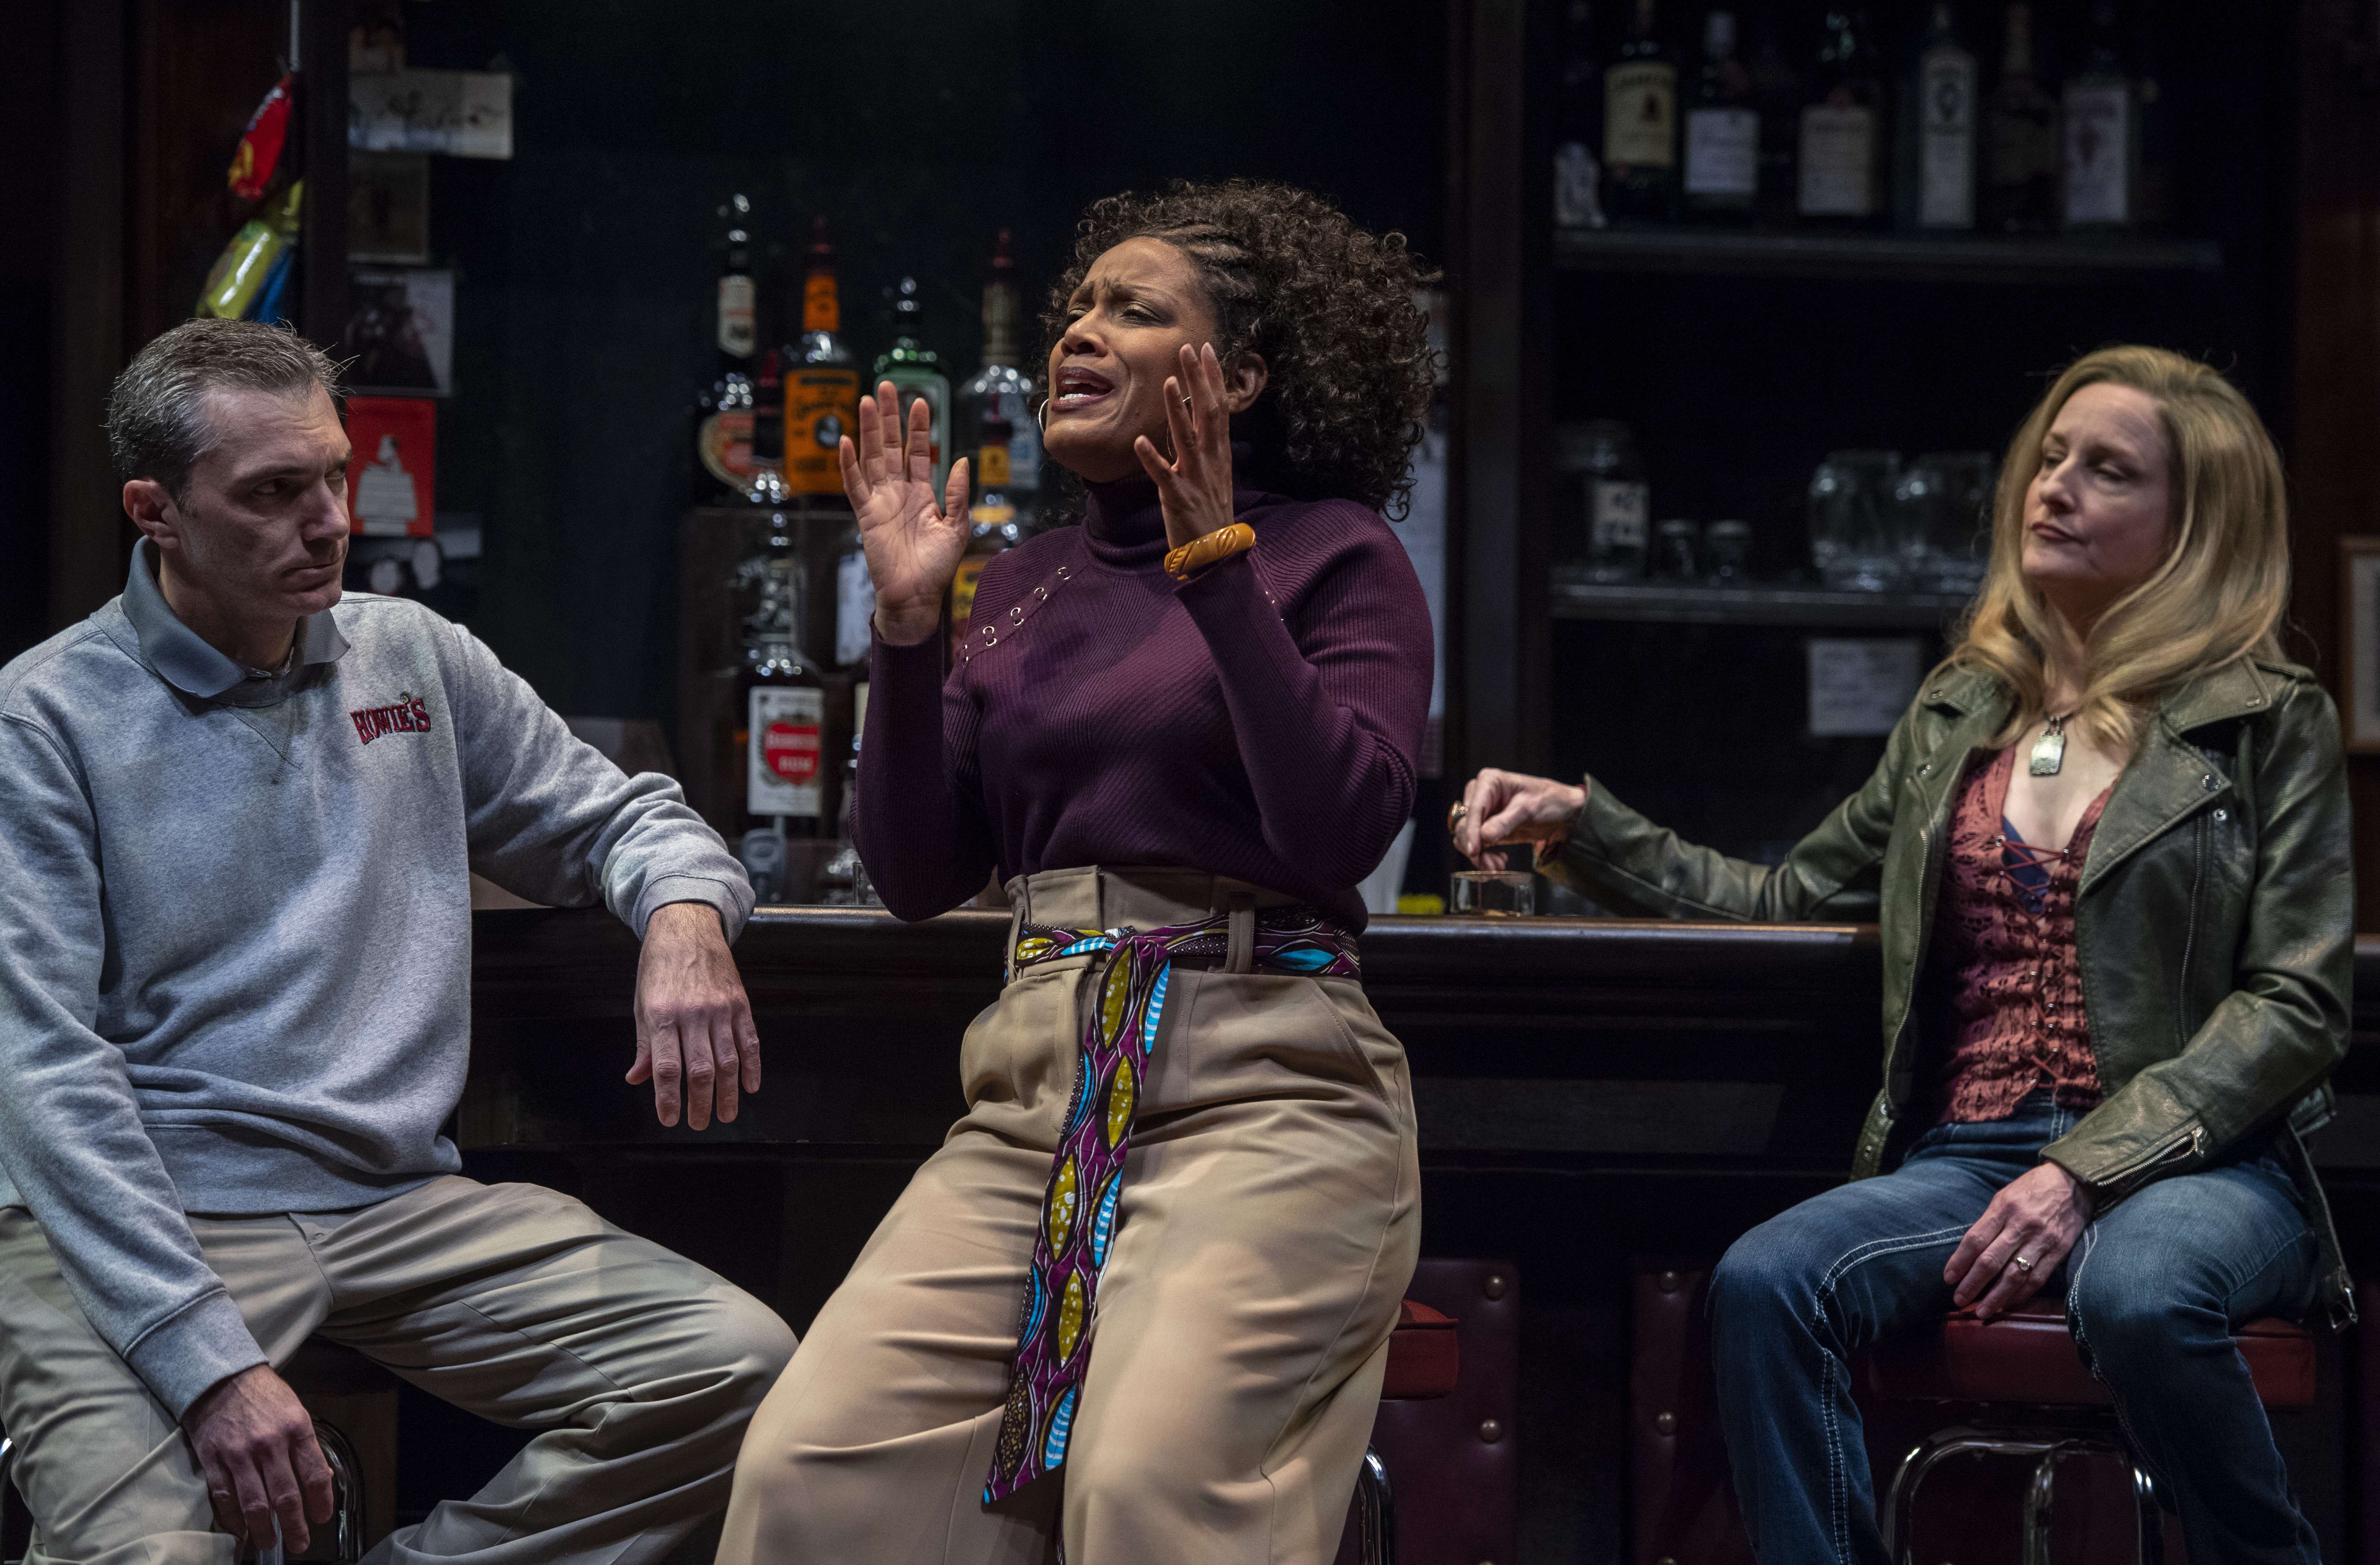 Blue-sky visions vs. blue-collar realities: Cynthia (Tracey Conyer Lee, center) expounds on the situation while Stan (Tony Bingham) and Tracey (Amy Landis) listen in 'Sweat.' Photo: courtesy of Pittsburgh Public Theater.